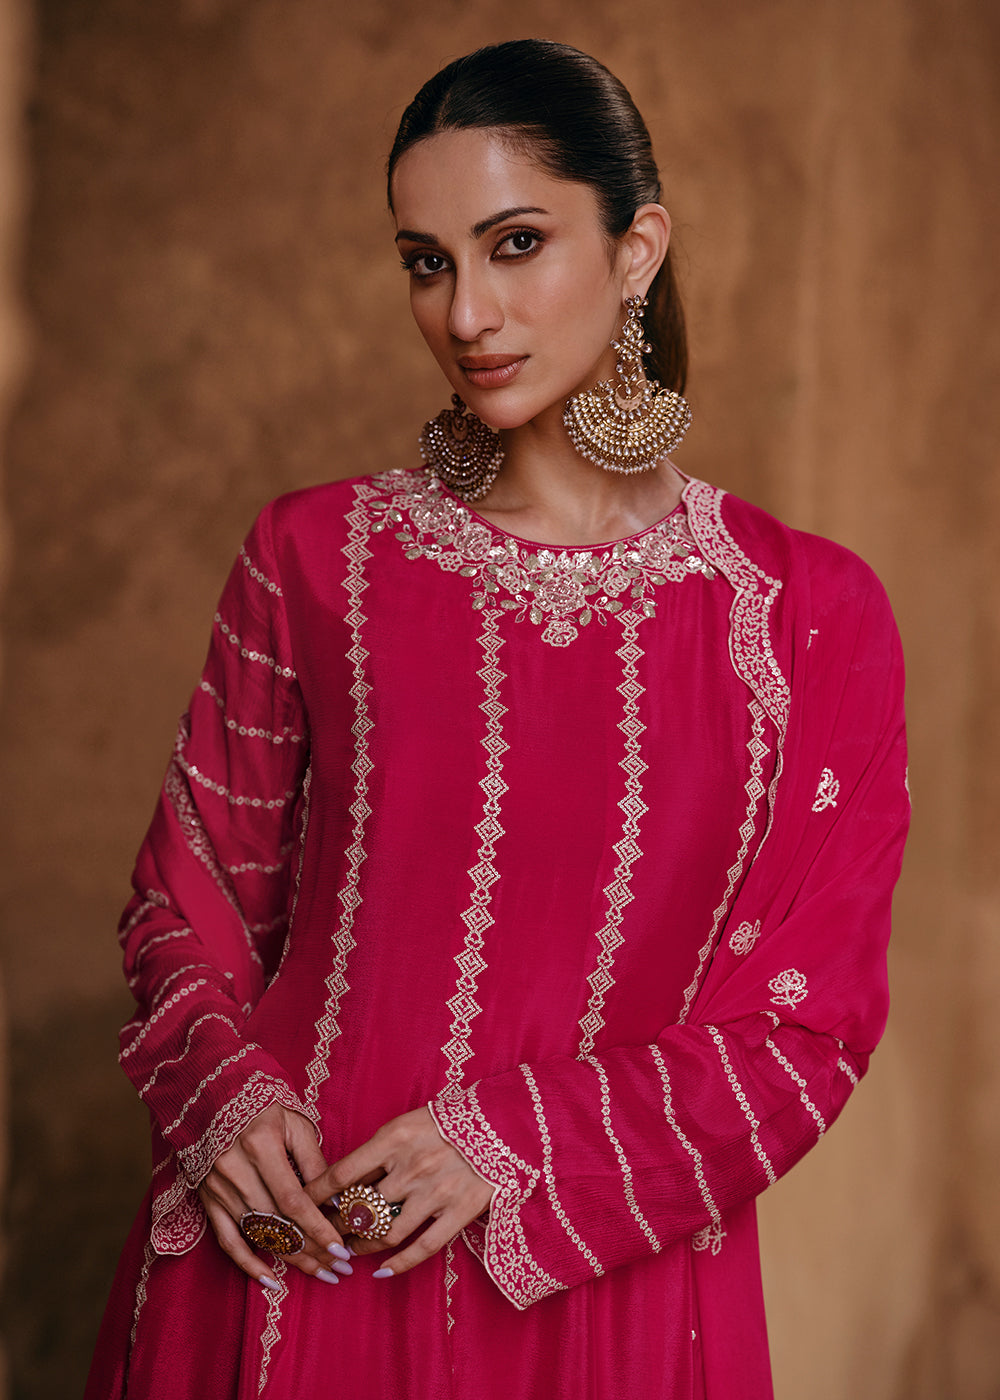 Shop Now Pink Chinnon Silk Designer Style Embroidered Sharara Suit Online at Empress Clothing in USA, UK, Canada, Italy & Worldwide. 